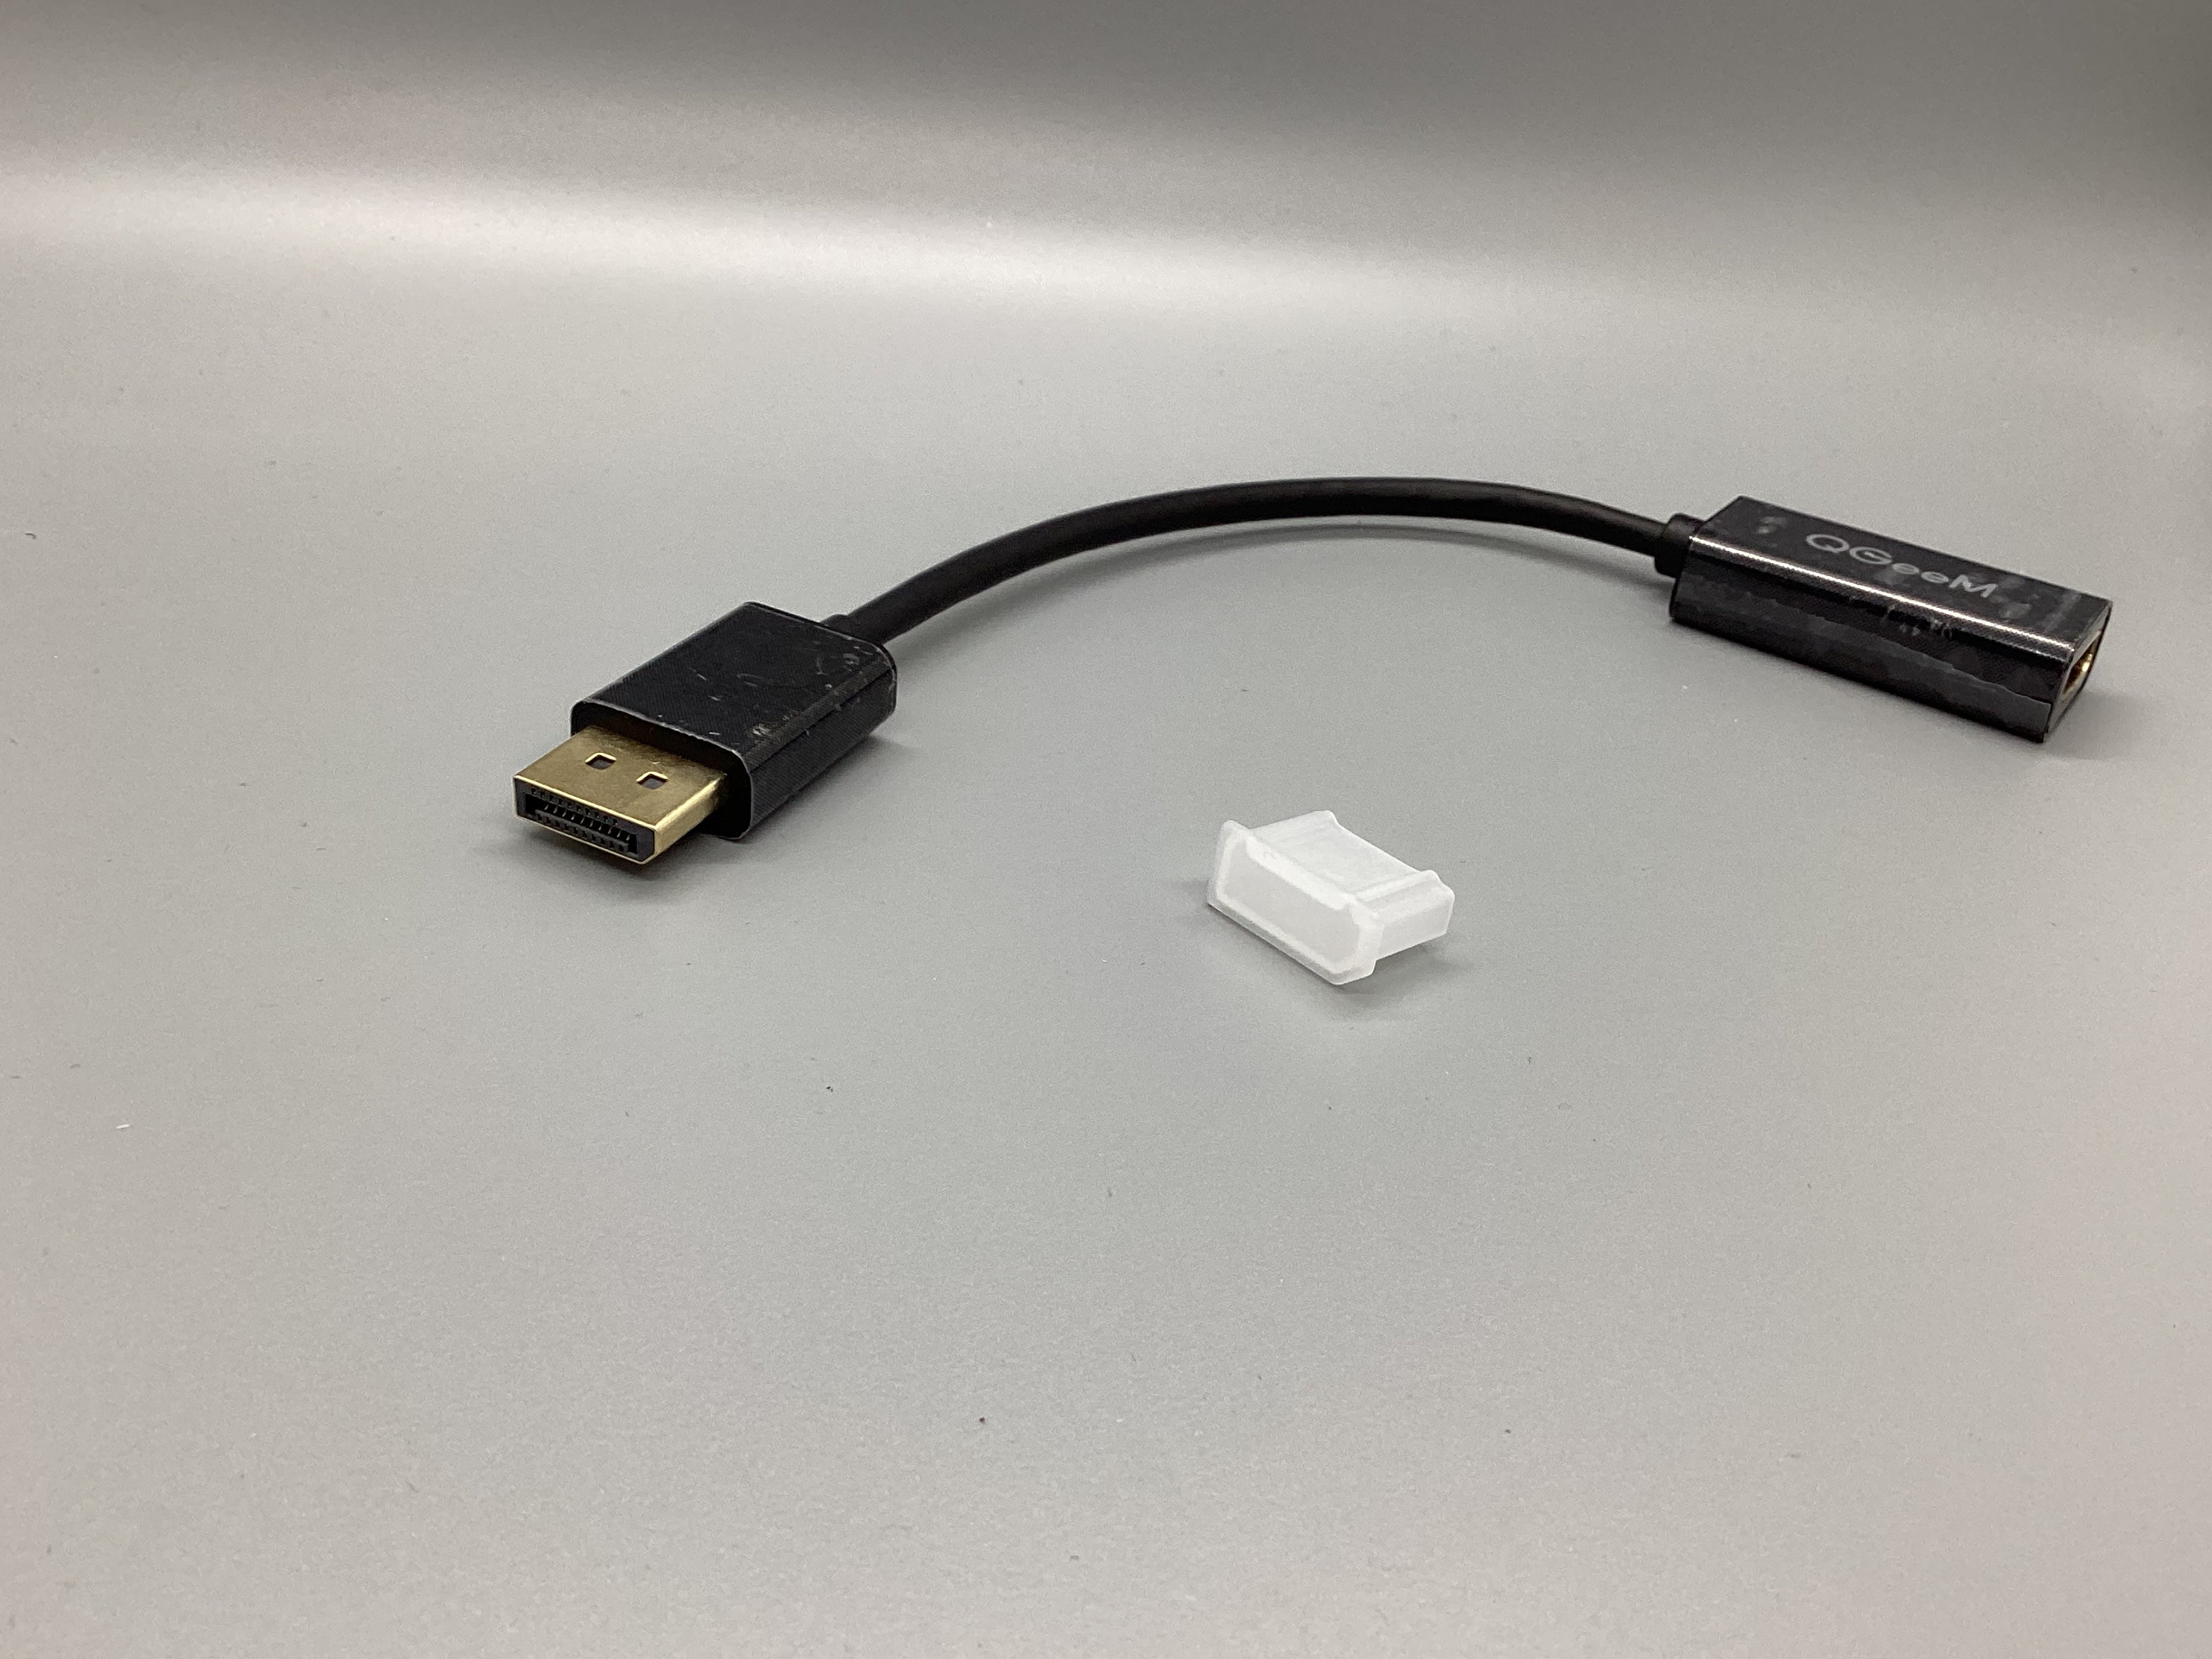 a black and white usb cable connected to a white device